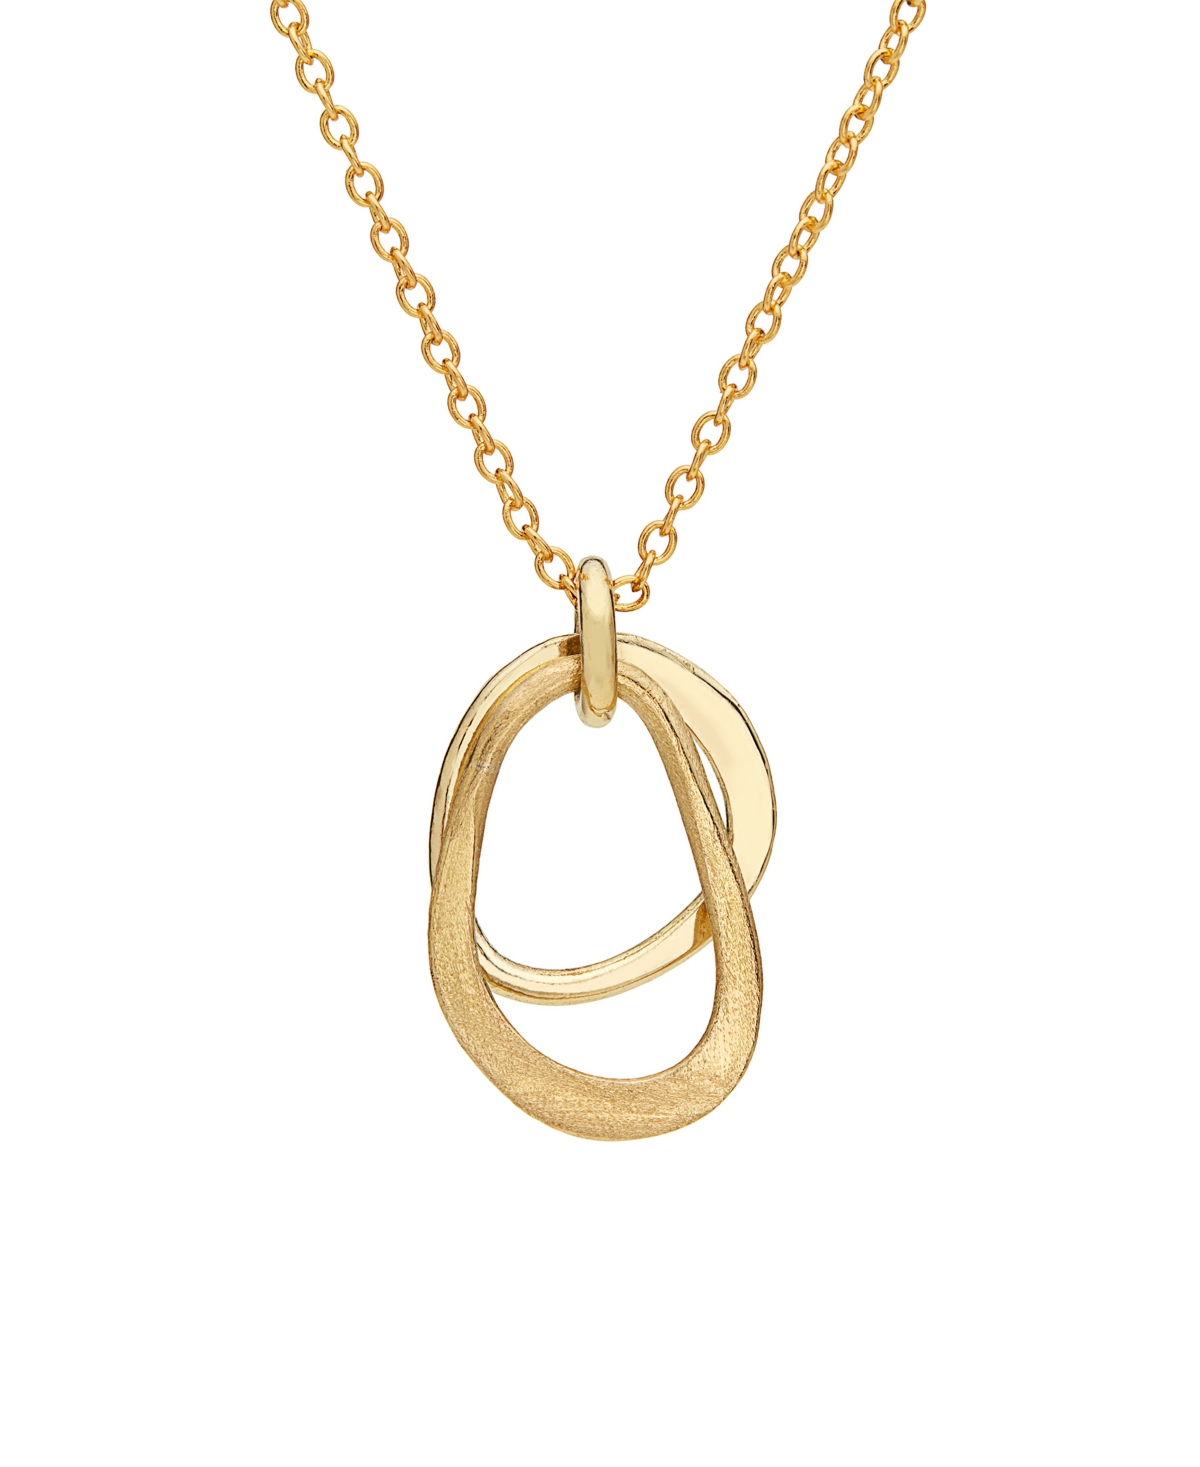 24K Gold-Plated Makali Delicate Necklace - Gold